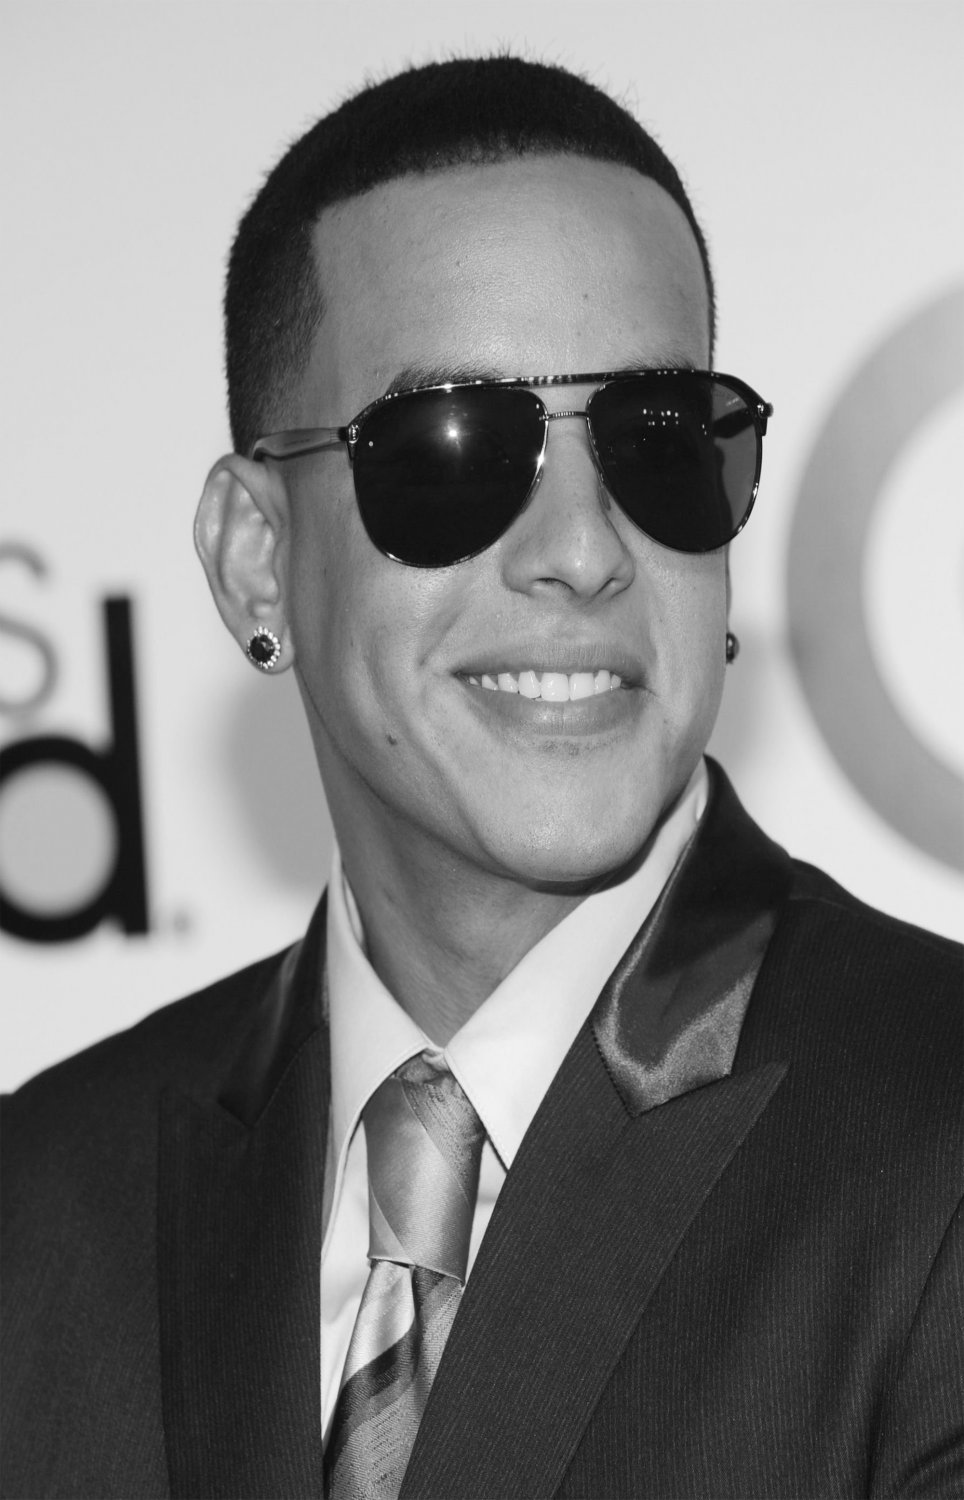 Daddy Yankee 13"x19" (32cm/49cm) Polyester Fabric Poster